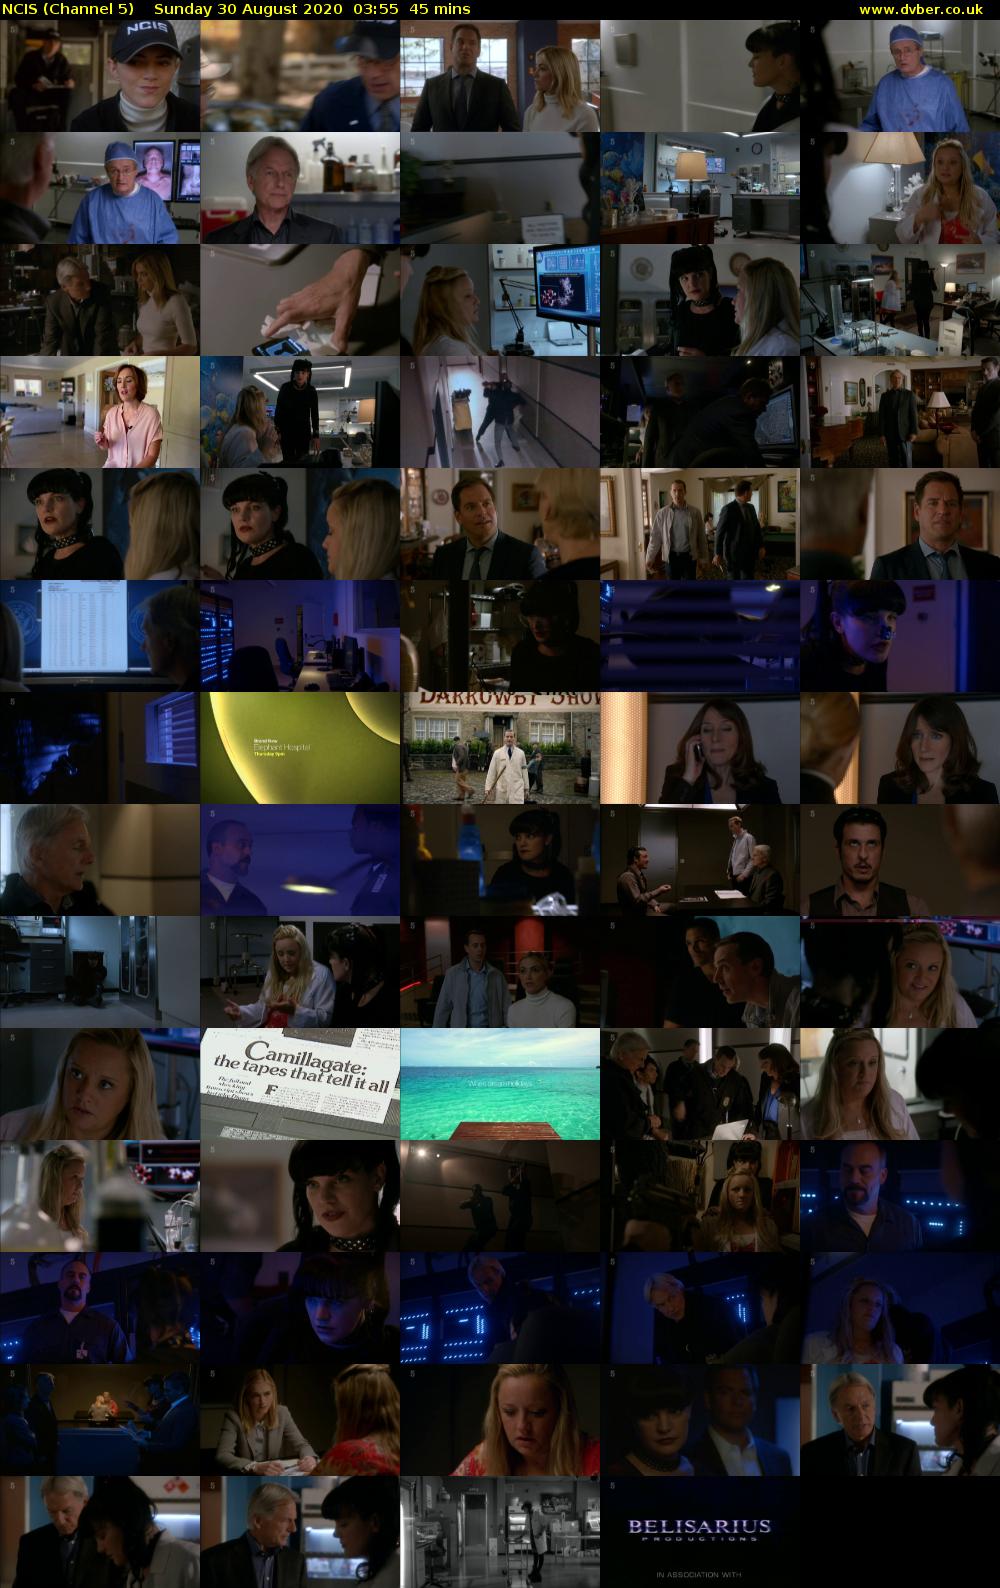 NCIS (Channel 5) Sunday 30 August 2020 03:55 - 04:40